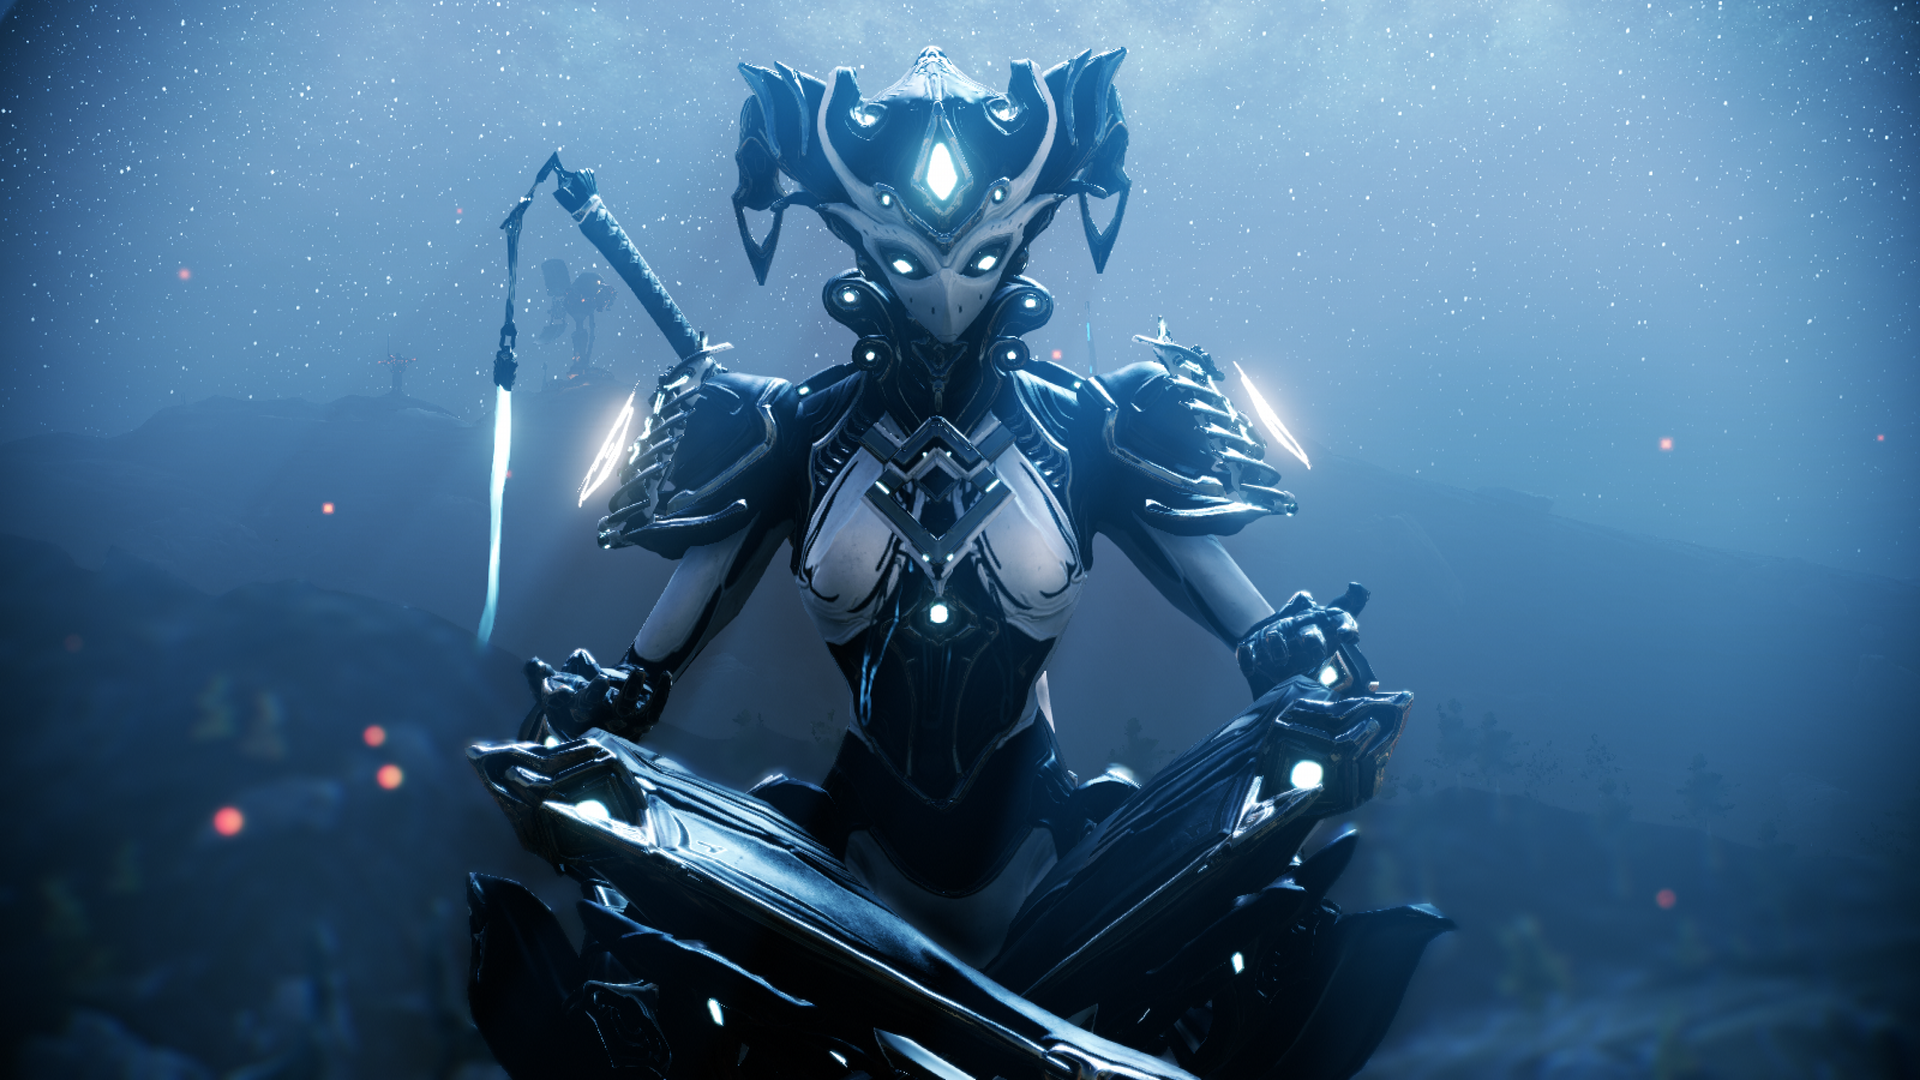 Mirage prime appearance change - General Discussion - Warframe Forums. 